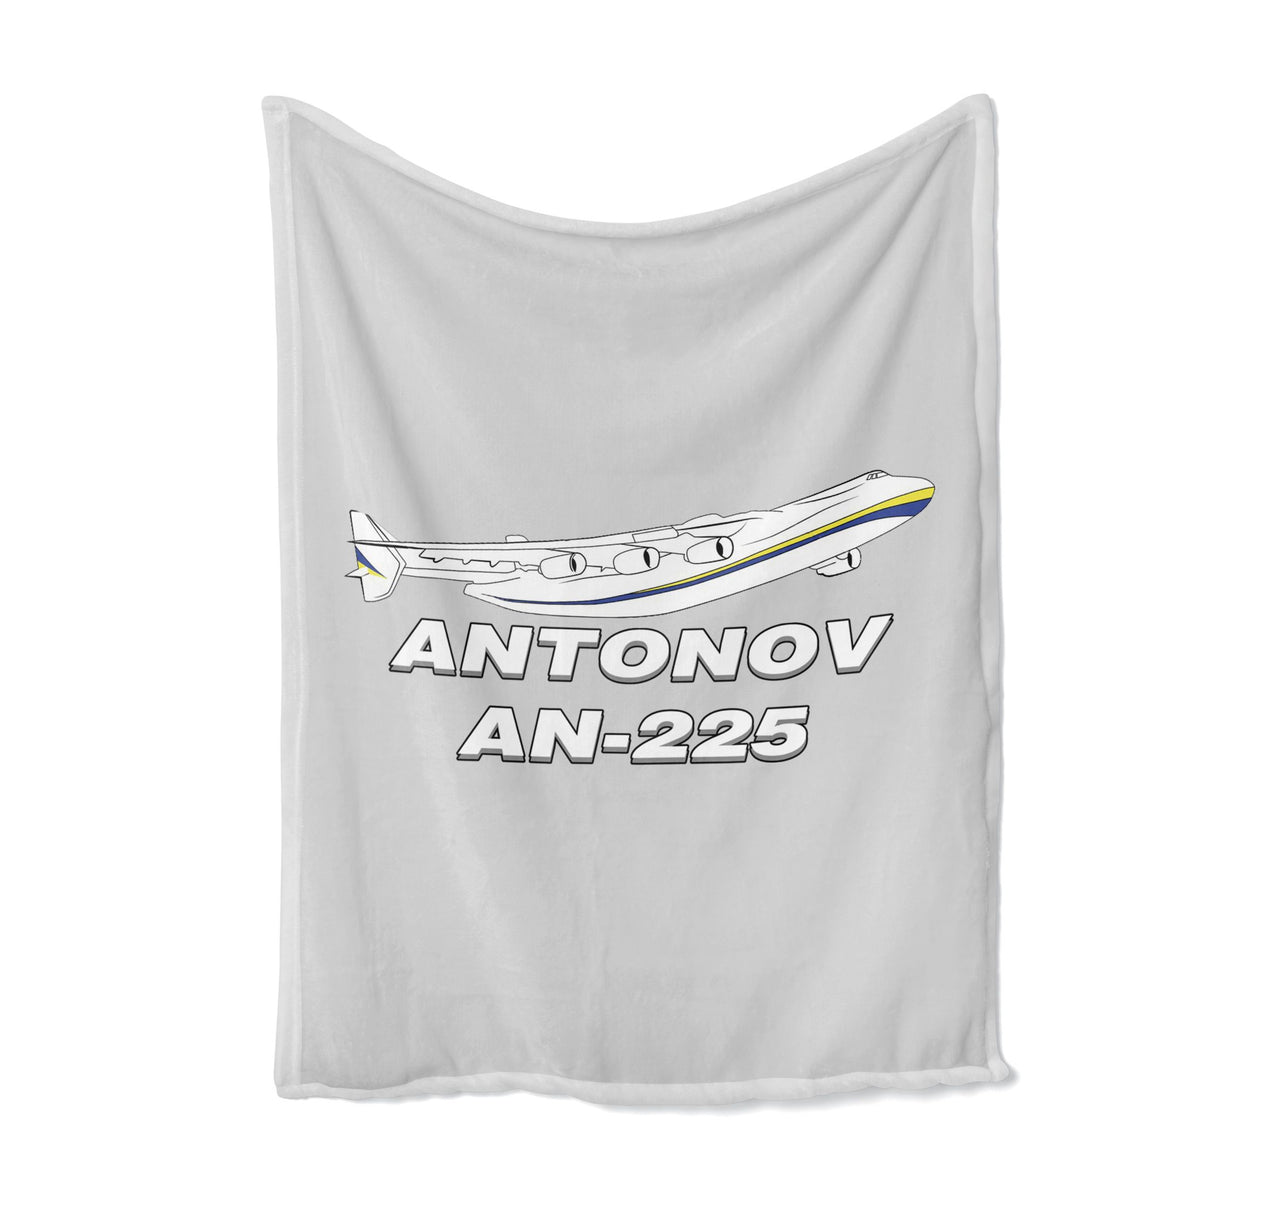 Antonov AN-225 (27) Designed Bed Blankets & Covers